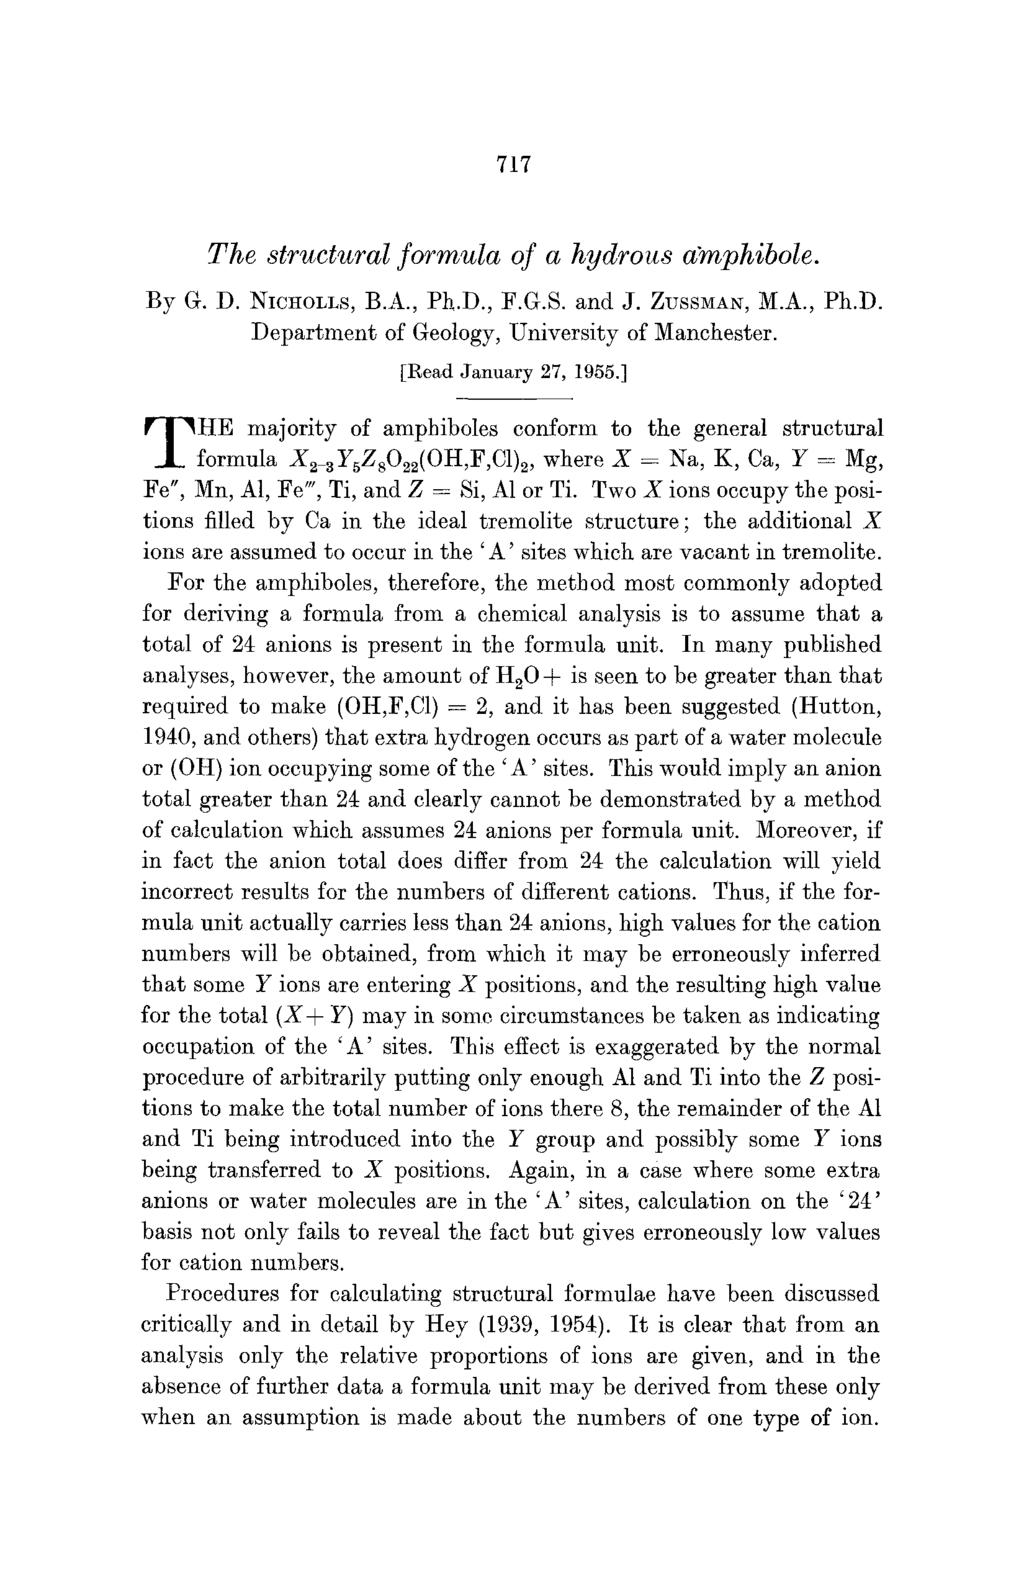 717 The structural formula of a hydrous amphibole. By G. D. NIC~OLLS, B.A., Ph.D., F.G.S. and J. ZVSSMAN, M.A., Ph.D. Department of Geology, University of Manchester. T [Read January 27, 1955.